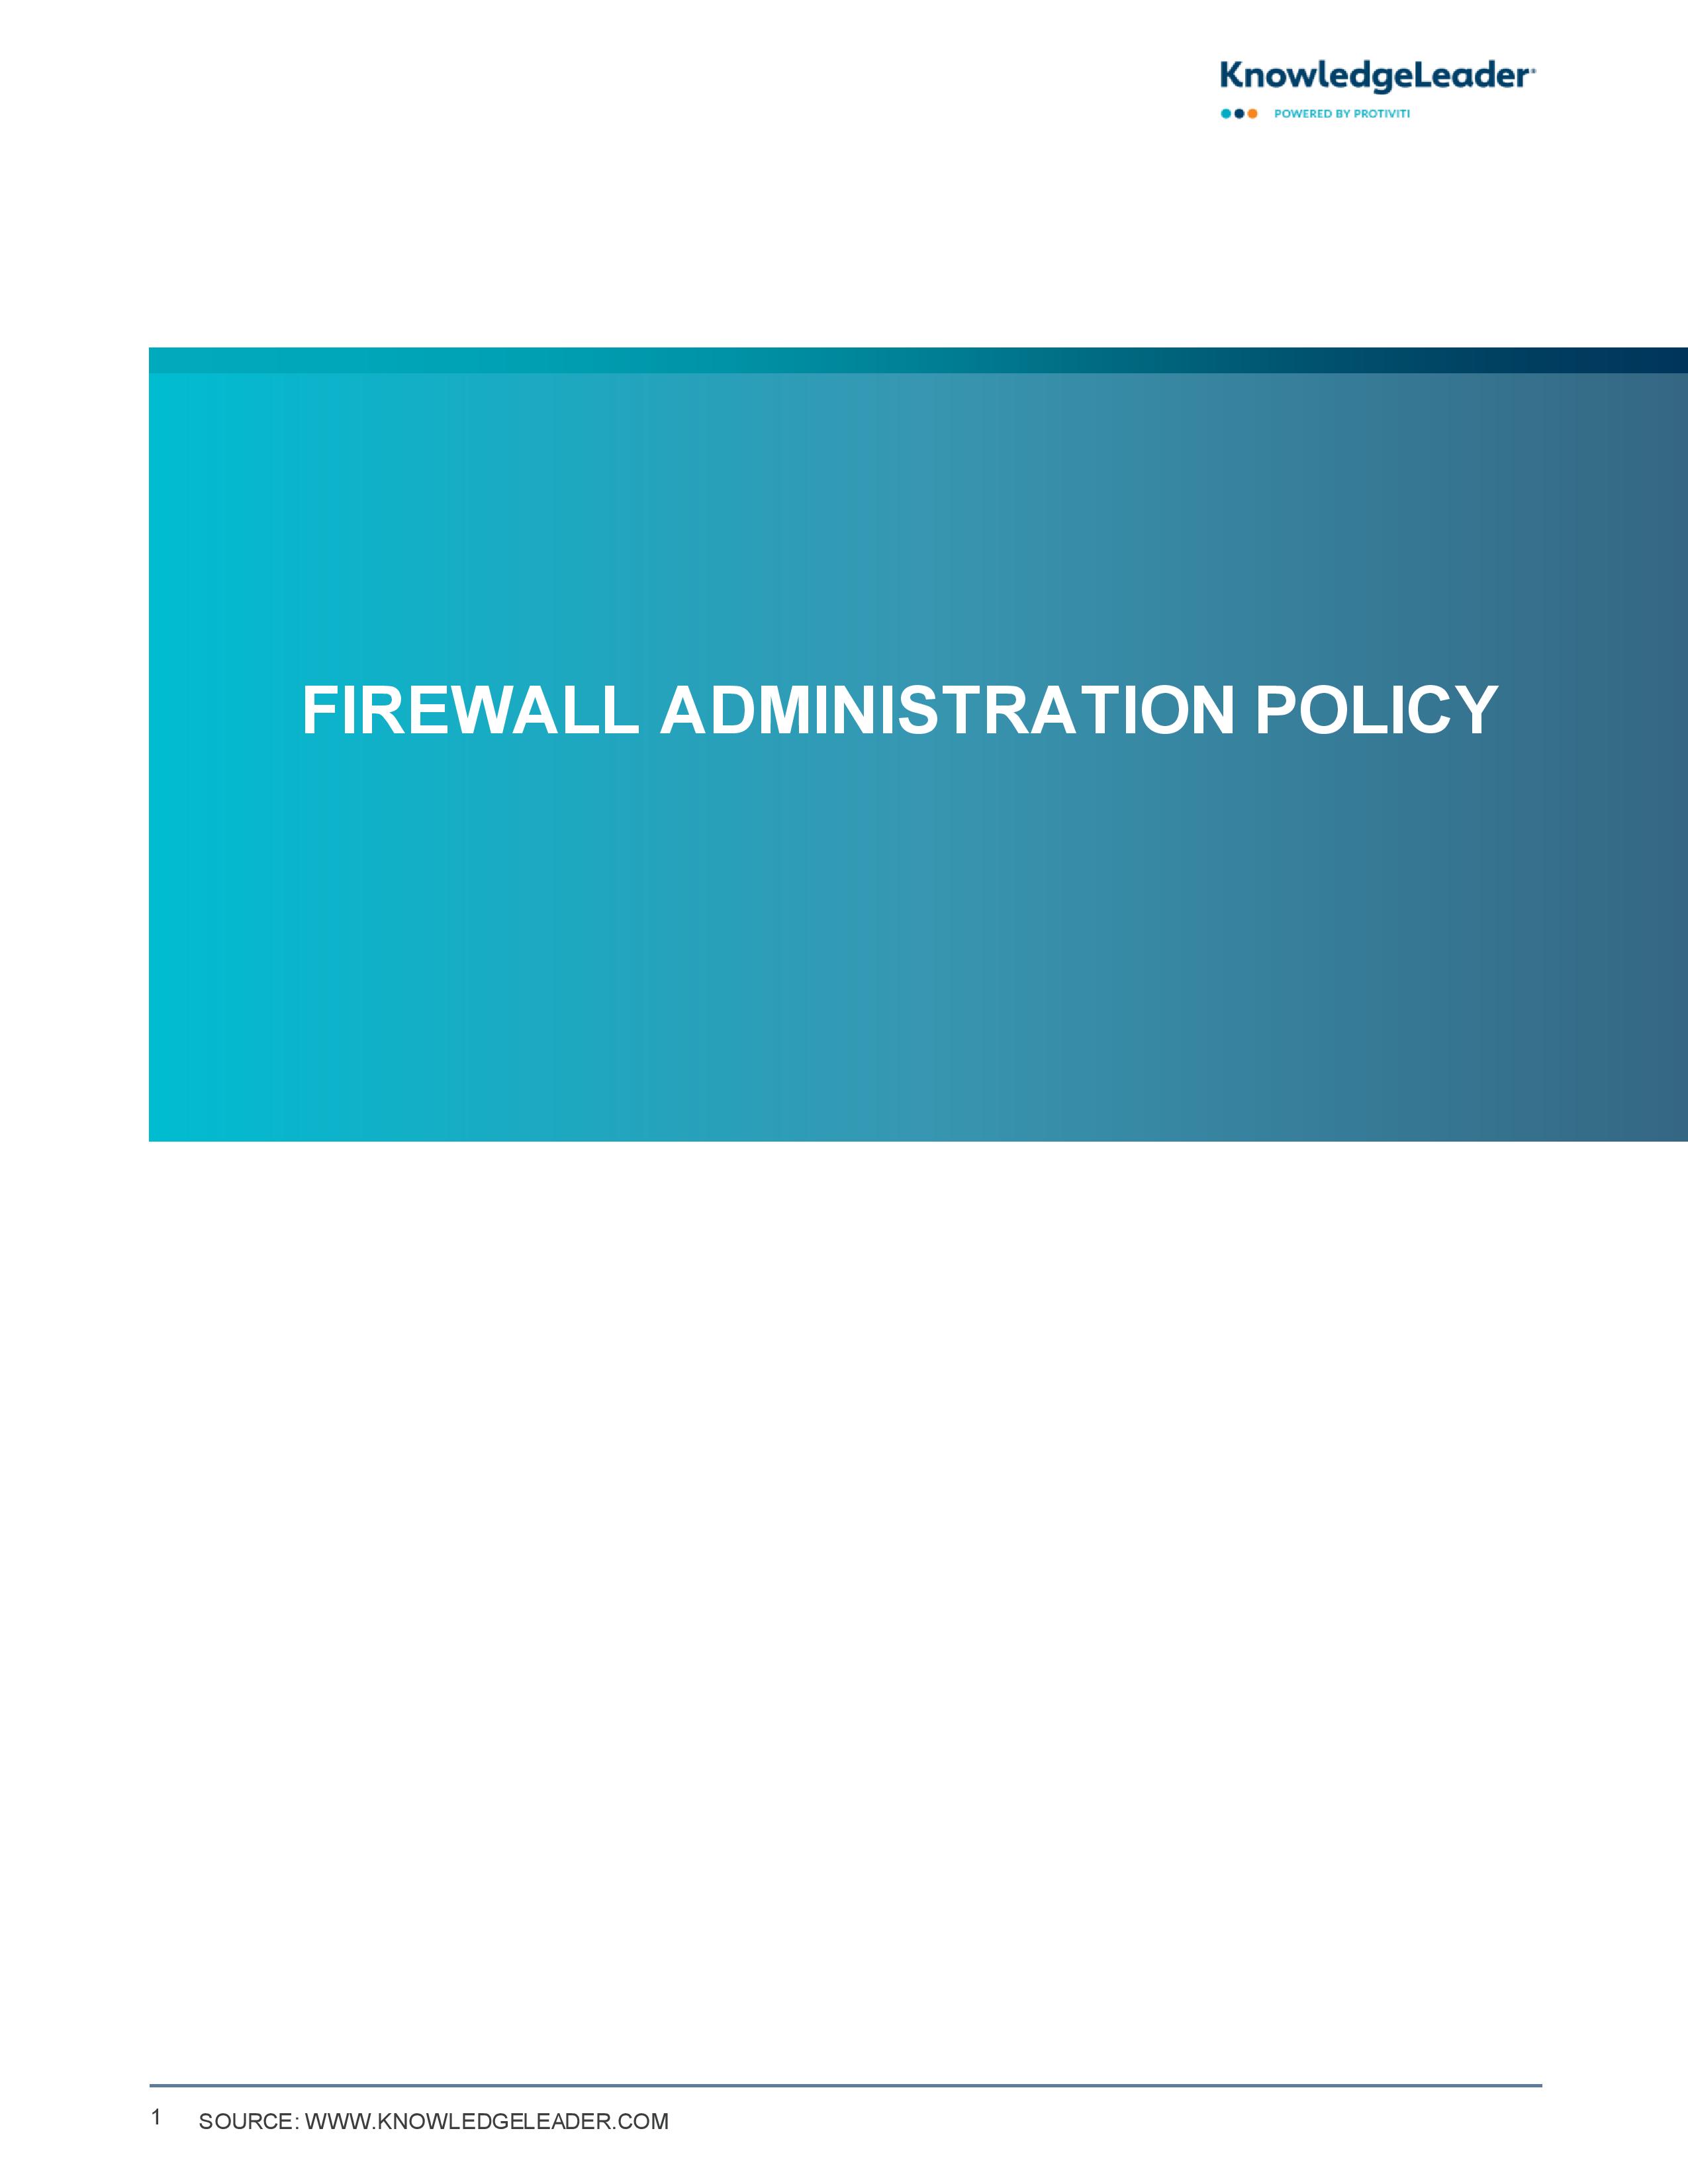 Screenshot of the first page of Firewall Administration Policy